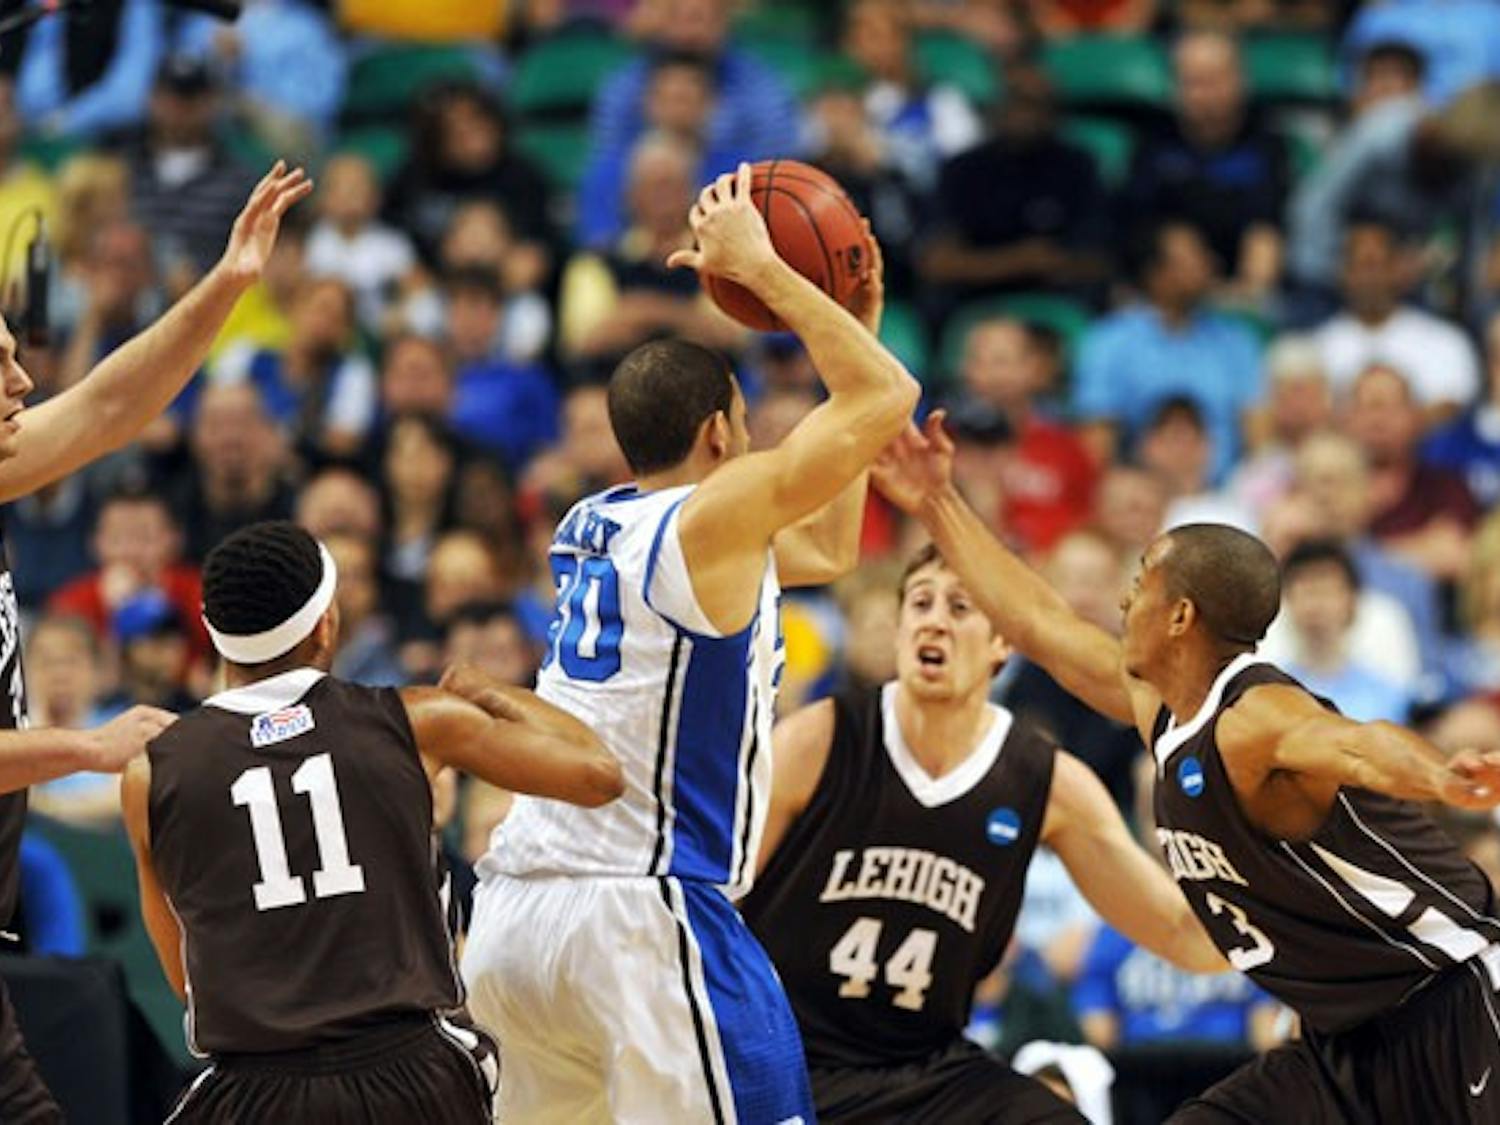 Duke was the sixth second-seeded team in NCAA history to lose to a No. 15 seed in the first round.